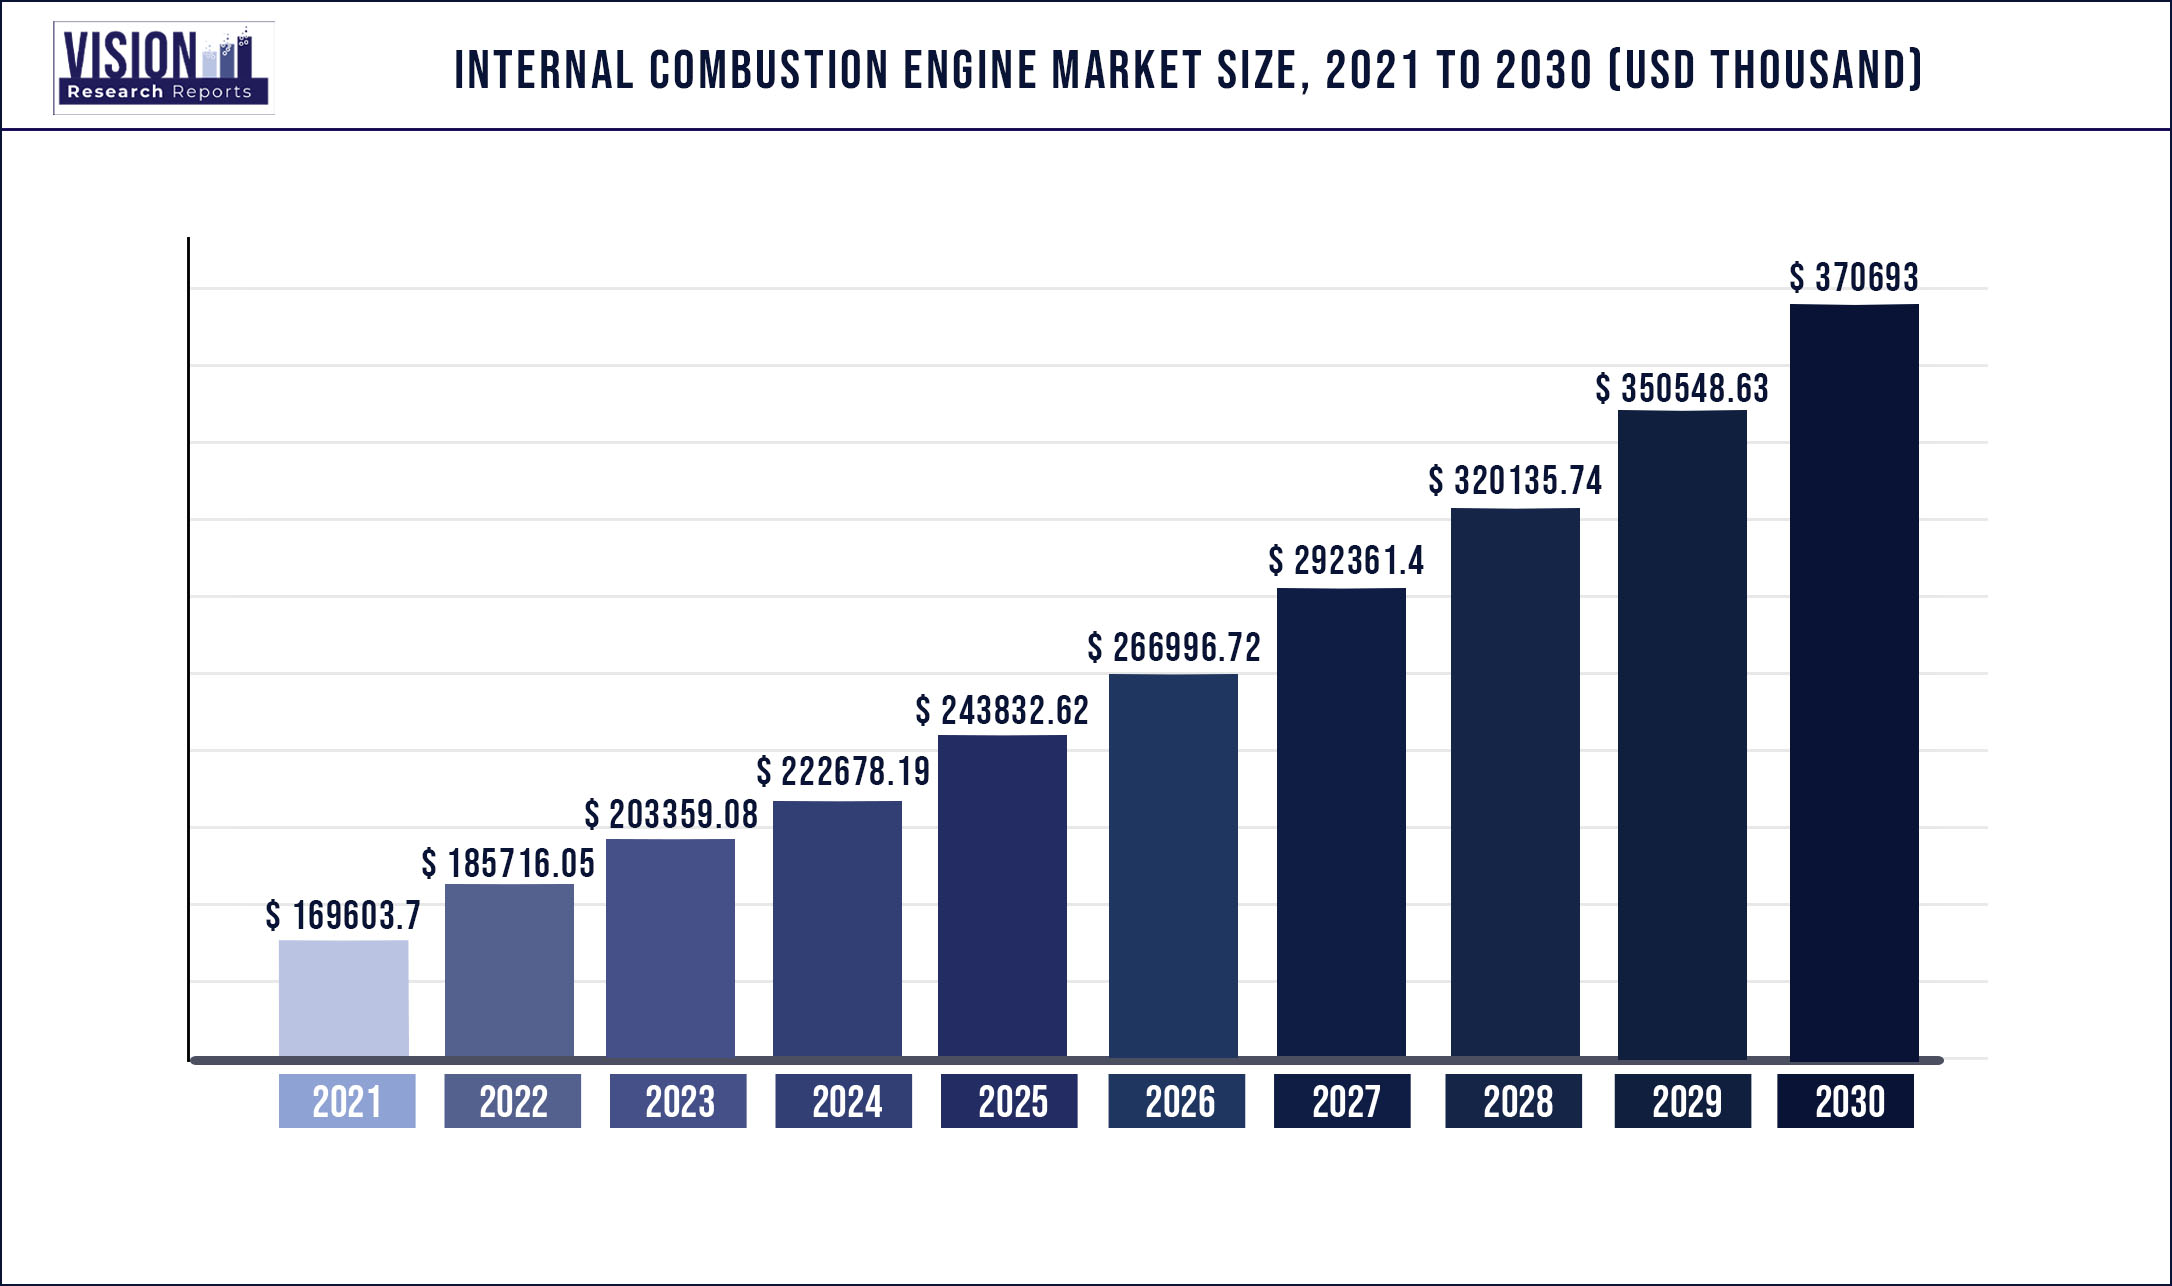 Internal Combustion Engine Market Size 2021 to 2030